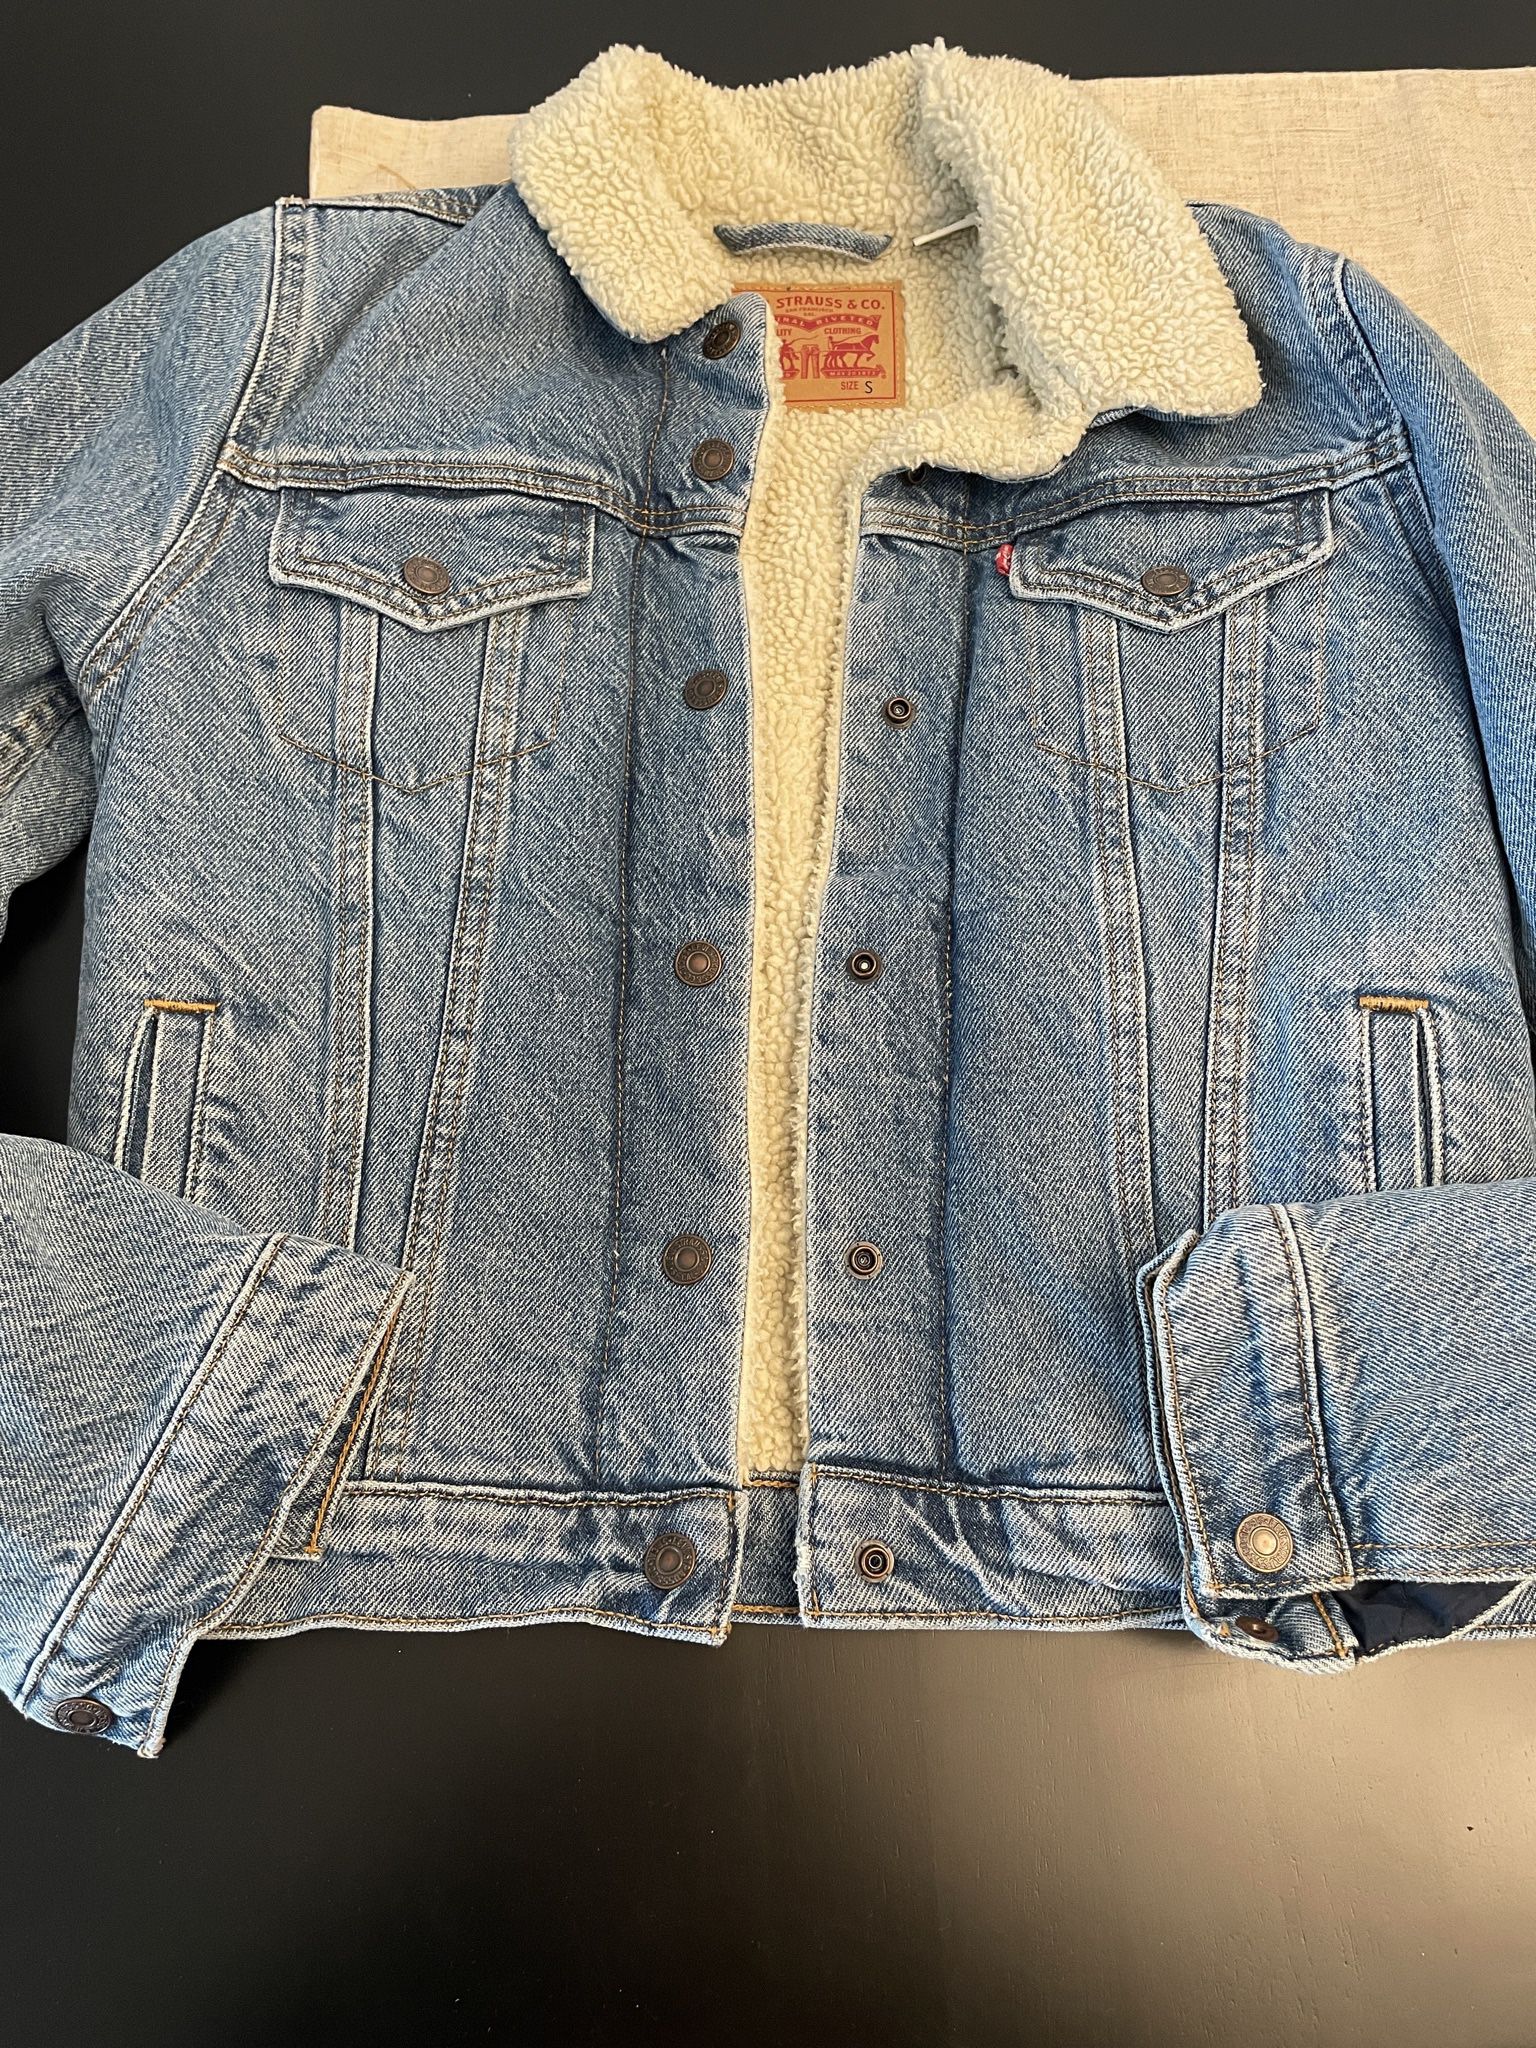 Levi Jean Jacket-Sherpa Lined -Small-retails For $90